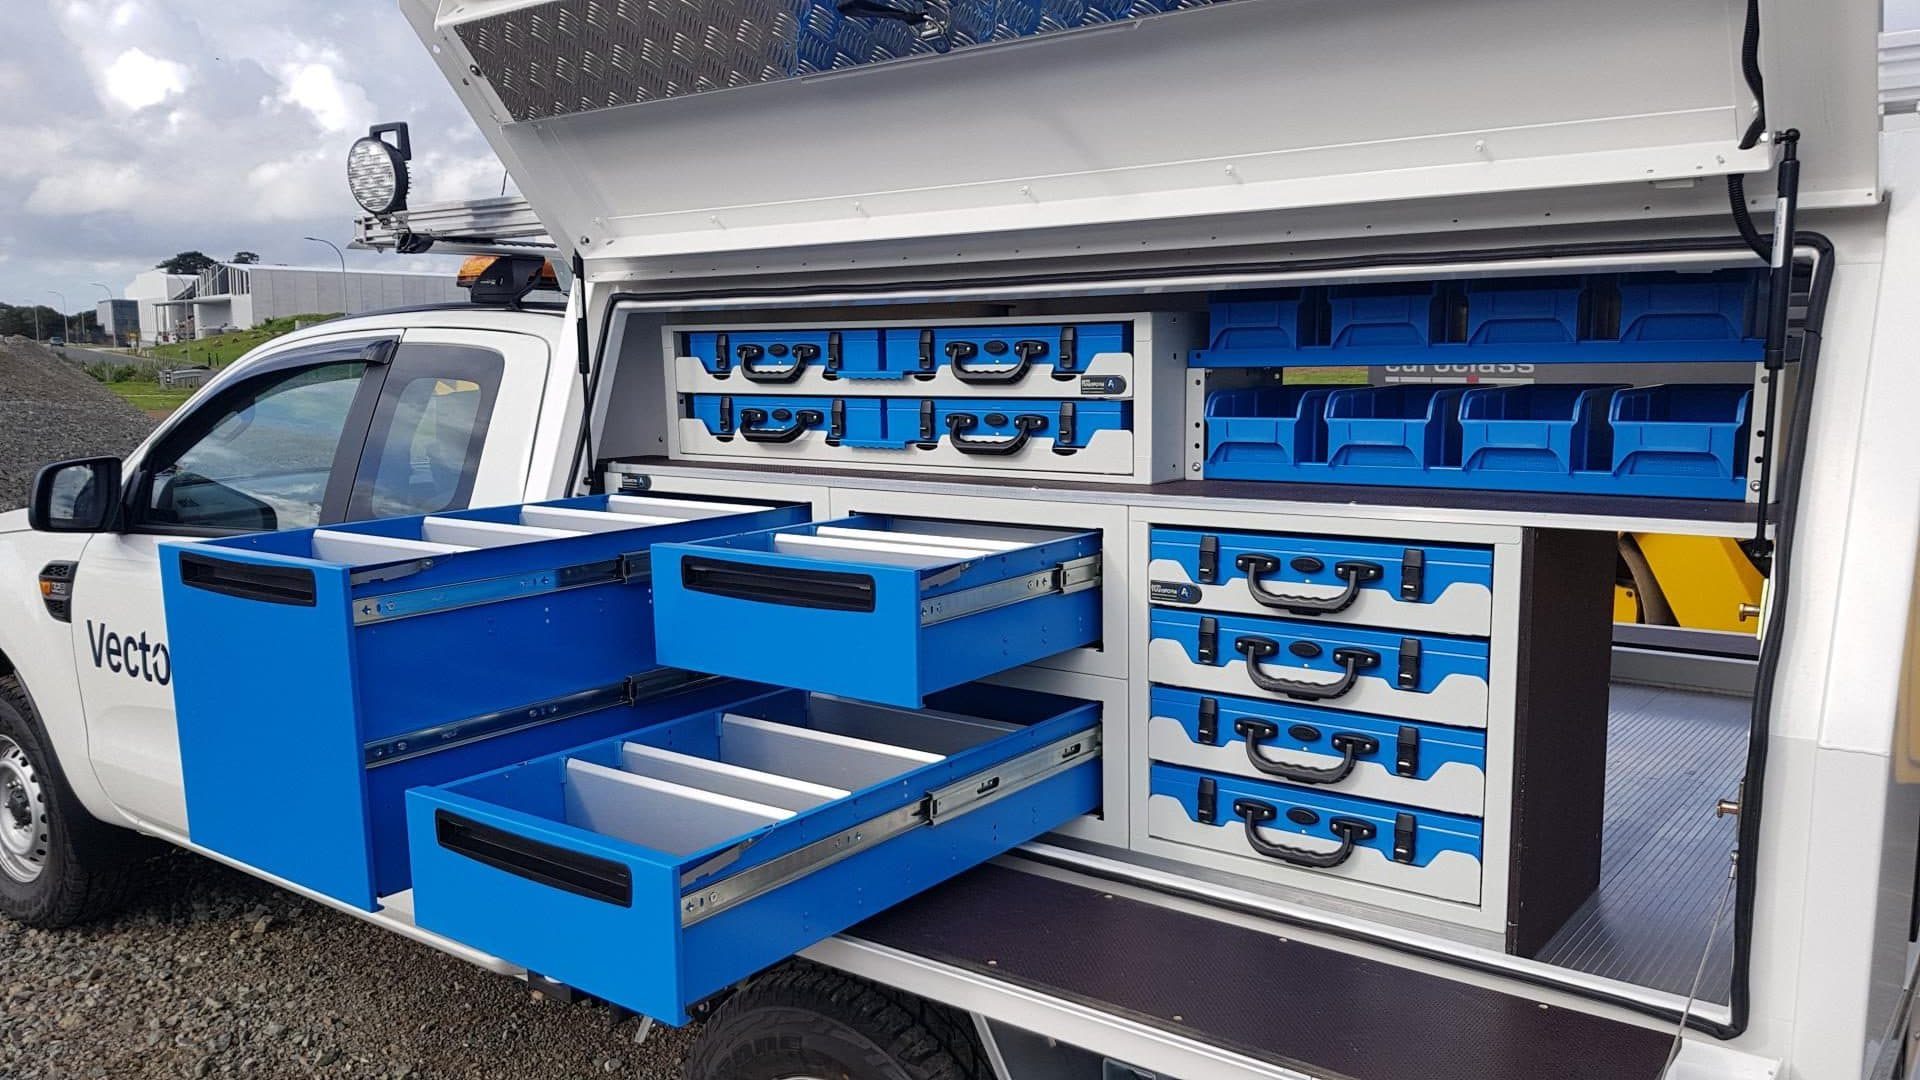 Modular plastic drawers and shelving for ute service body